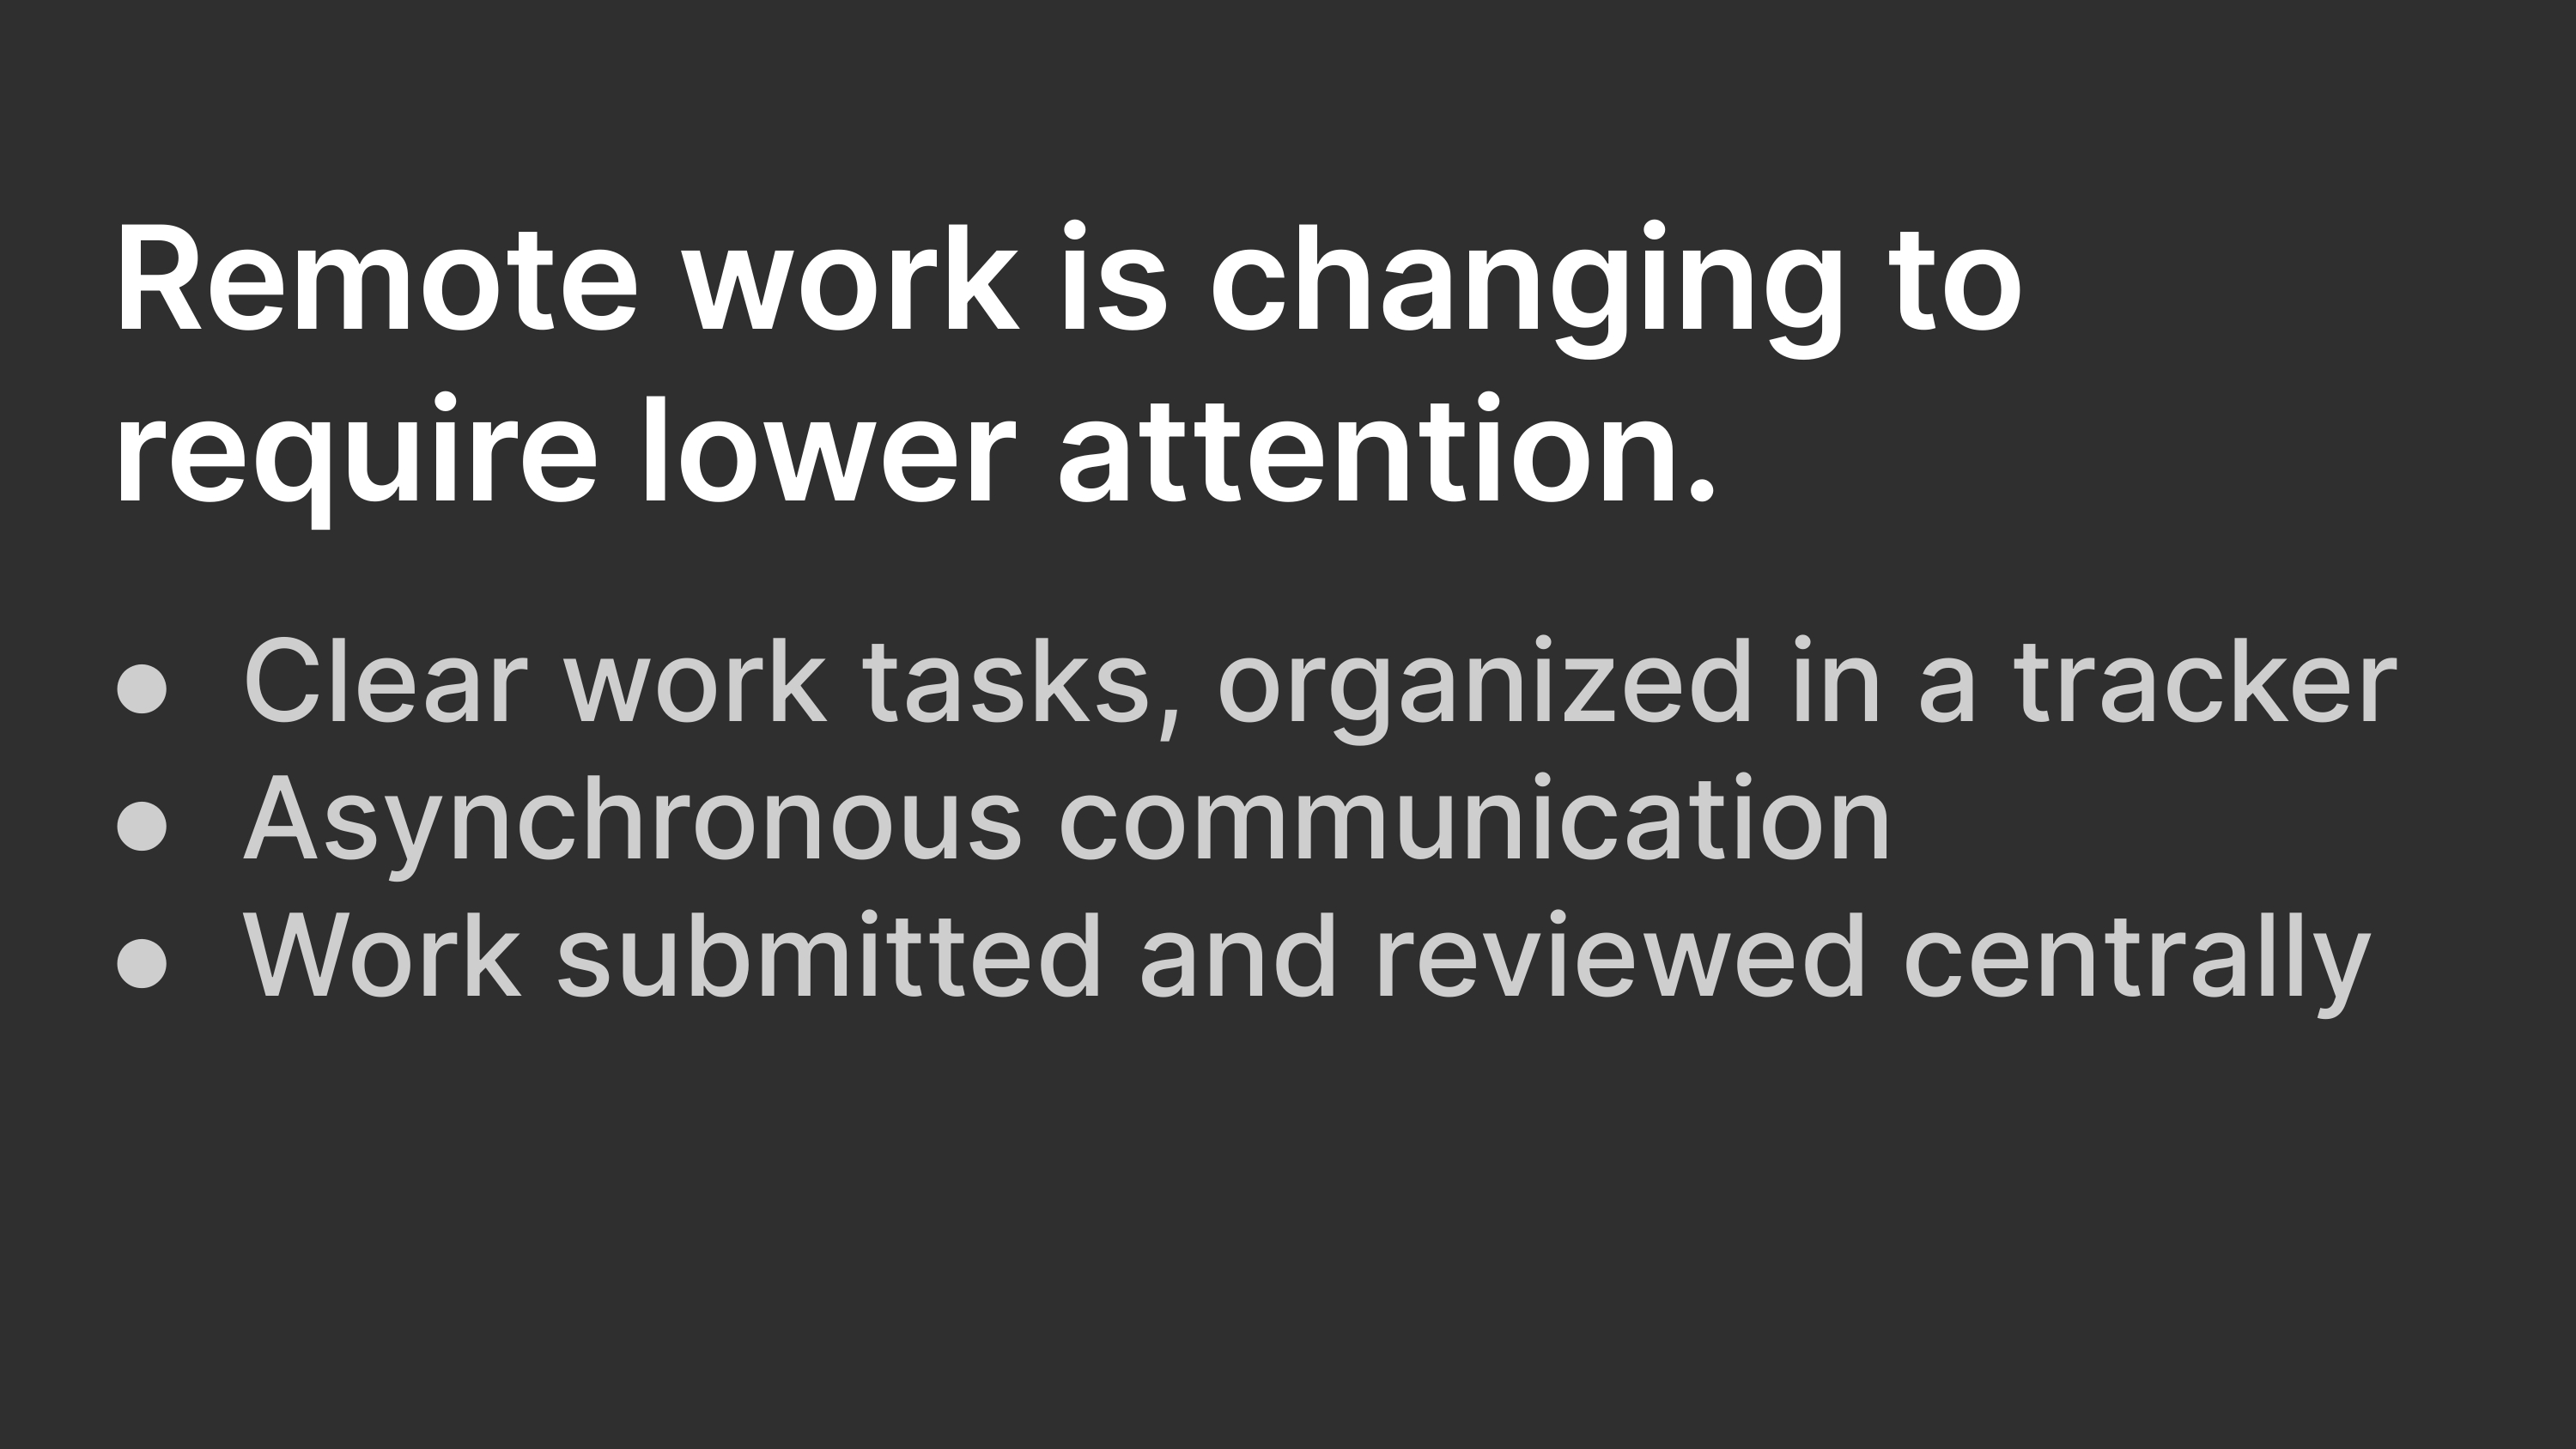 Remote work is changing to require lower attention: Clear work tasks, organized in a tracker; Asynchronous communication; Work submitted and reviewed centrally.